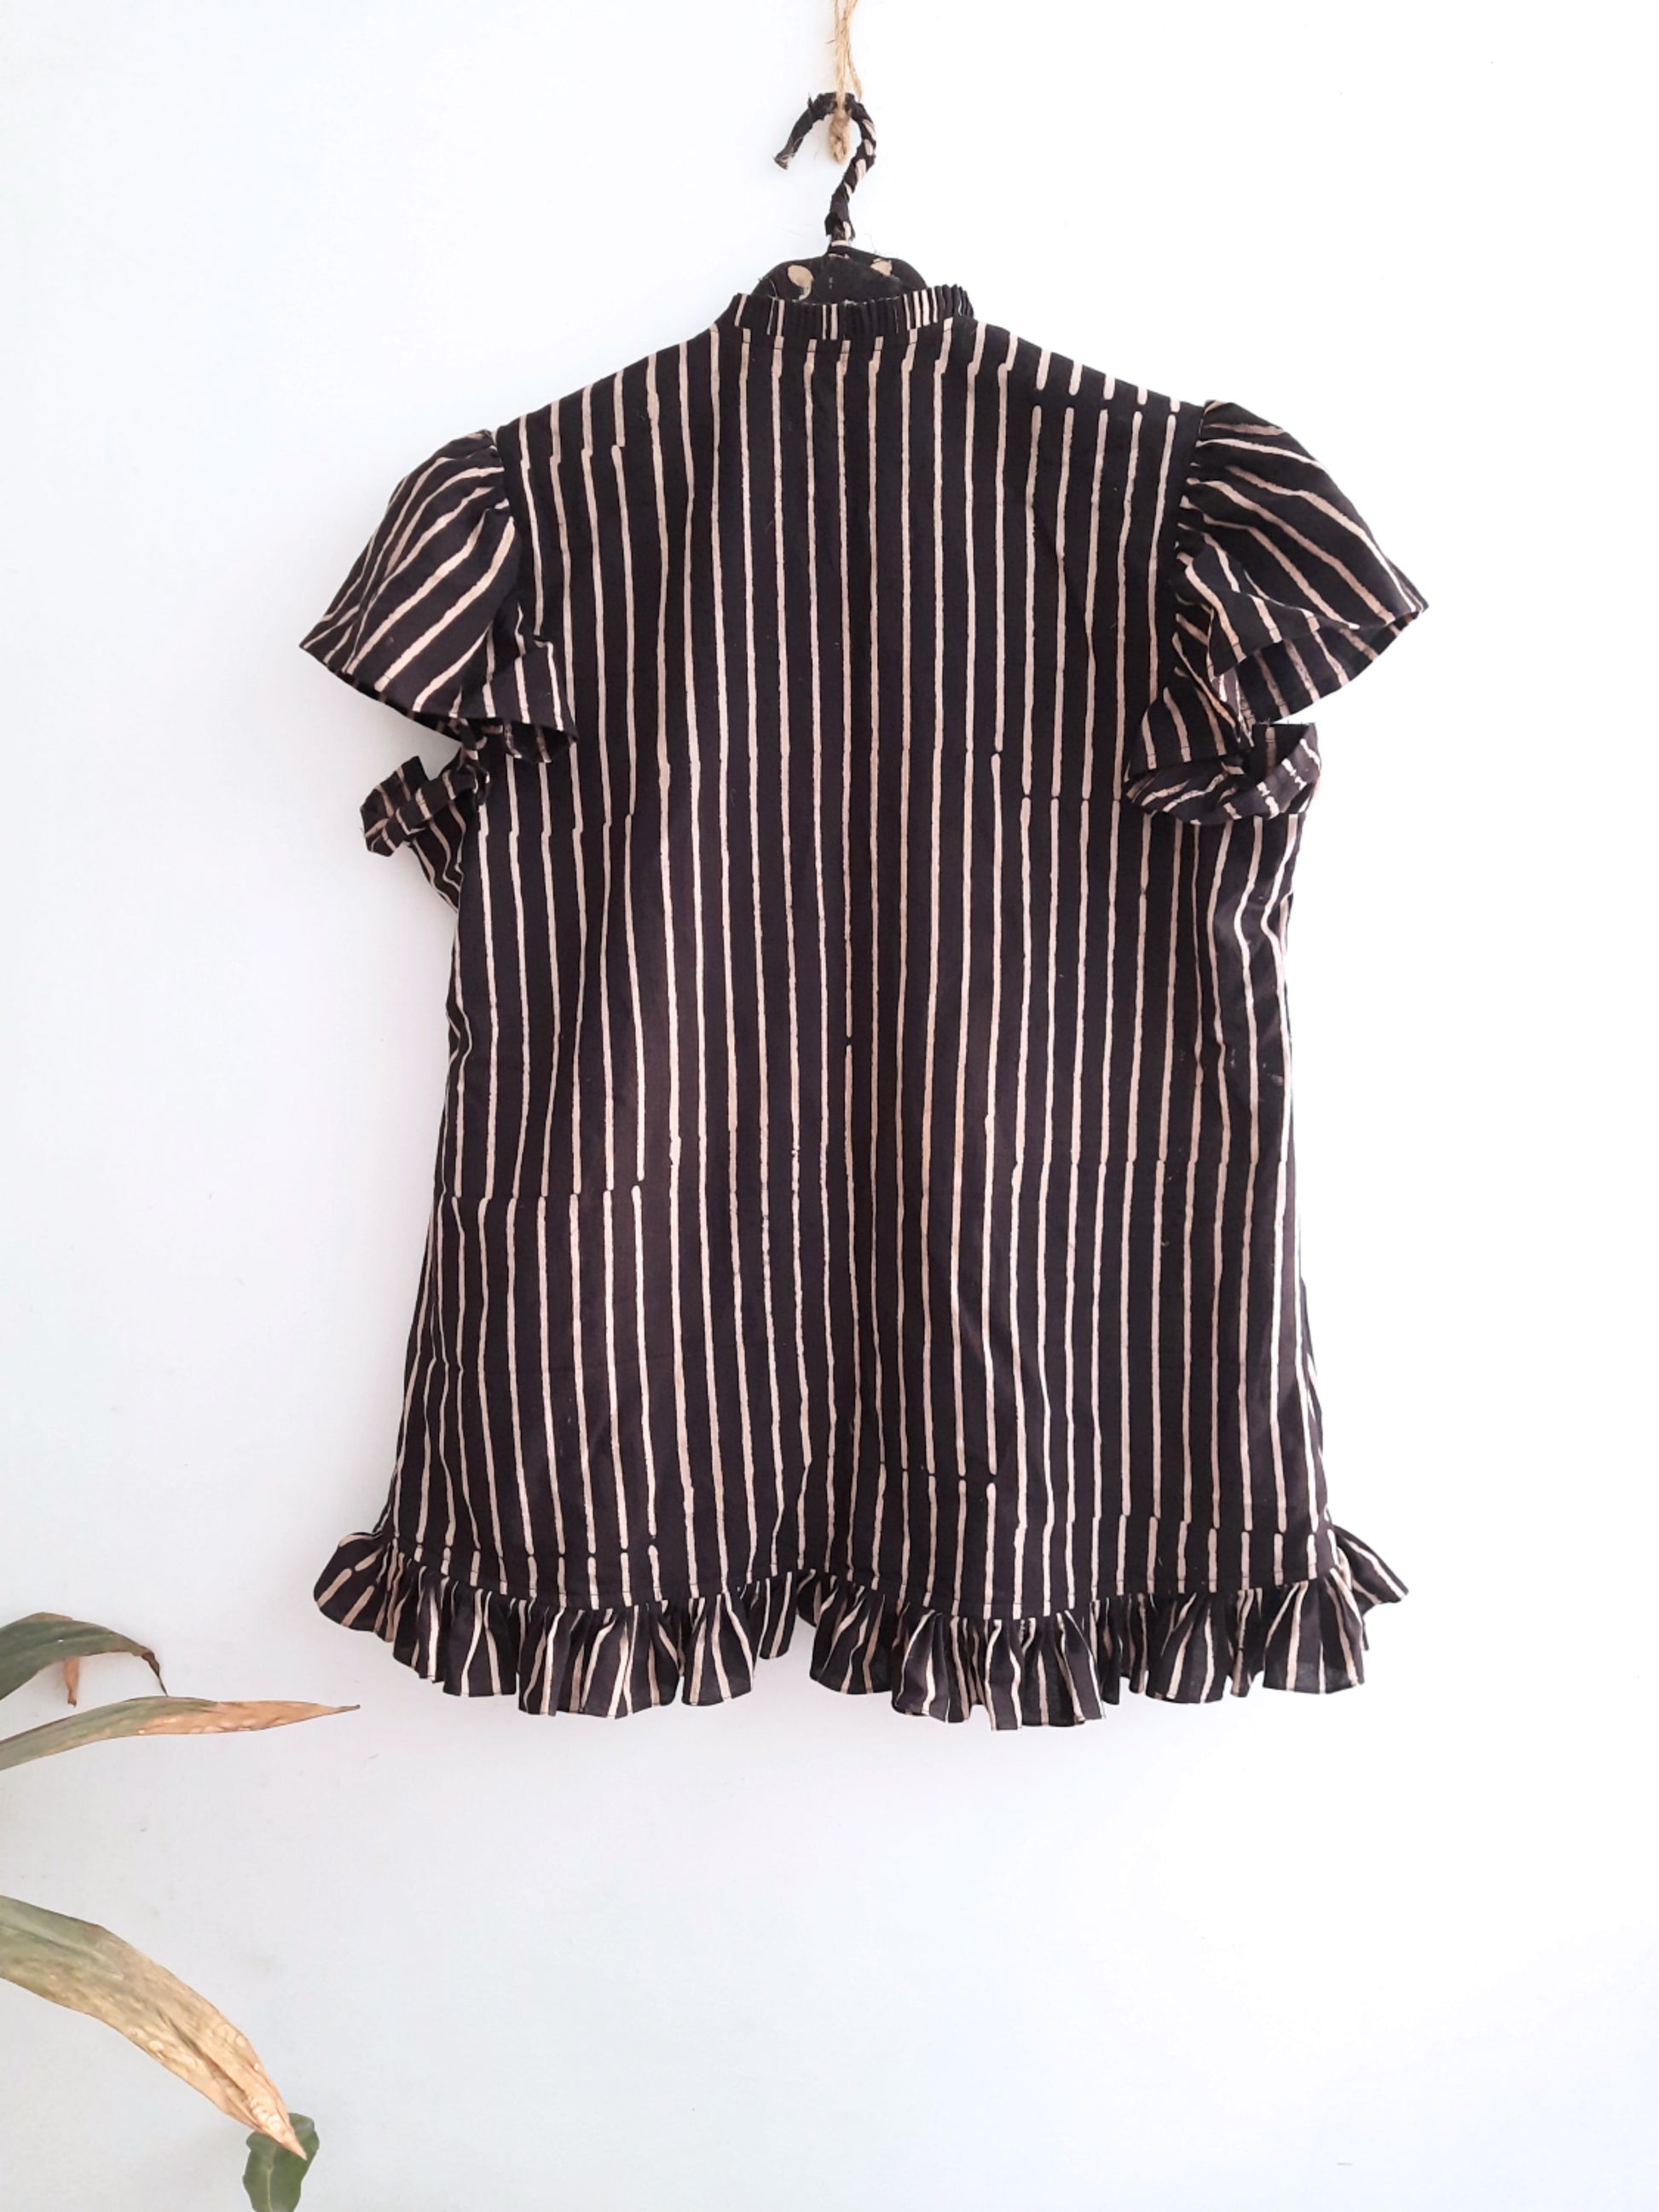 Monochrome elegance in our Rhythm in Monochrome black striped shirt for her. Handcrafted with ajrakh printing, sustainable and naturally dyed. Unique ruffles on sleeves, hem, and collar for the perfect blend of comfort and chicness. Elevate your wardrobe with this statement piece.